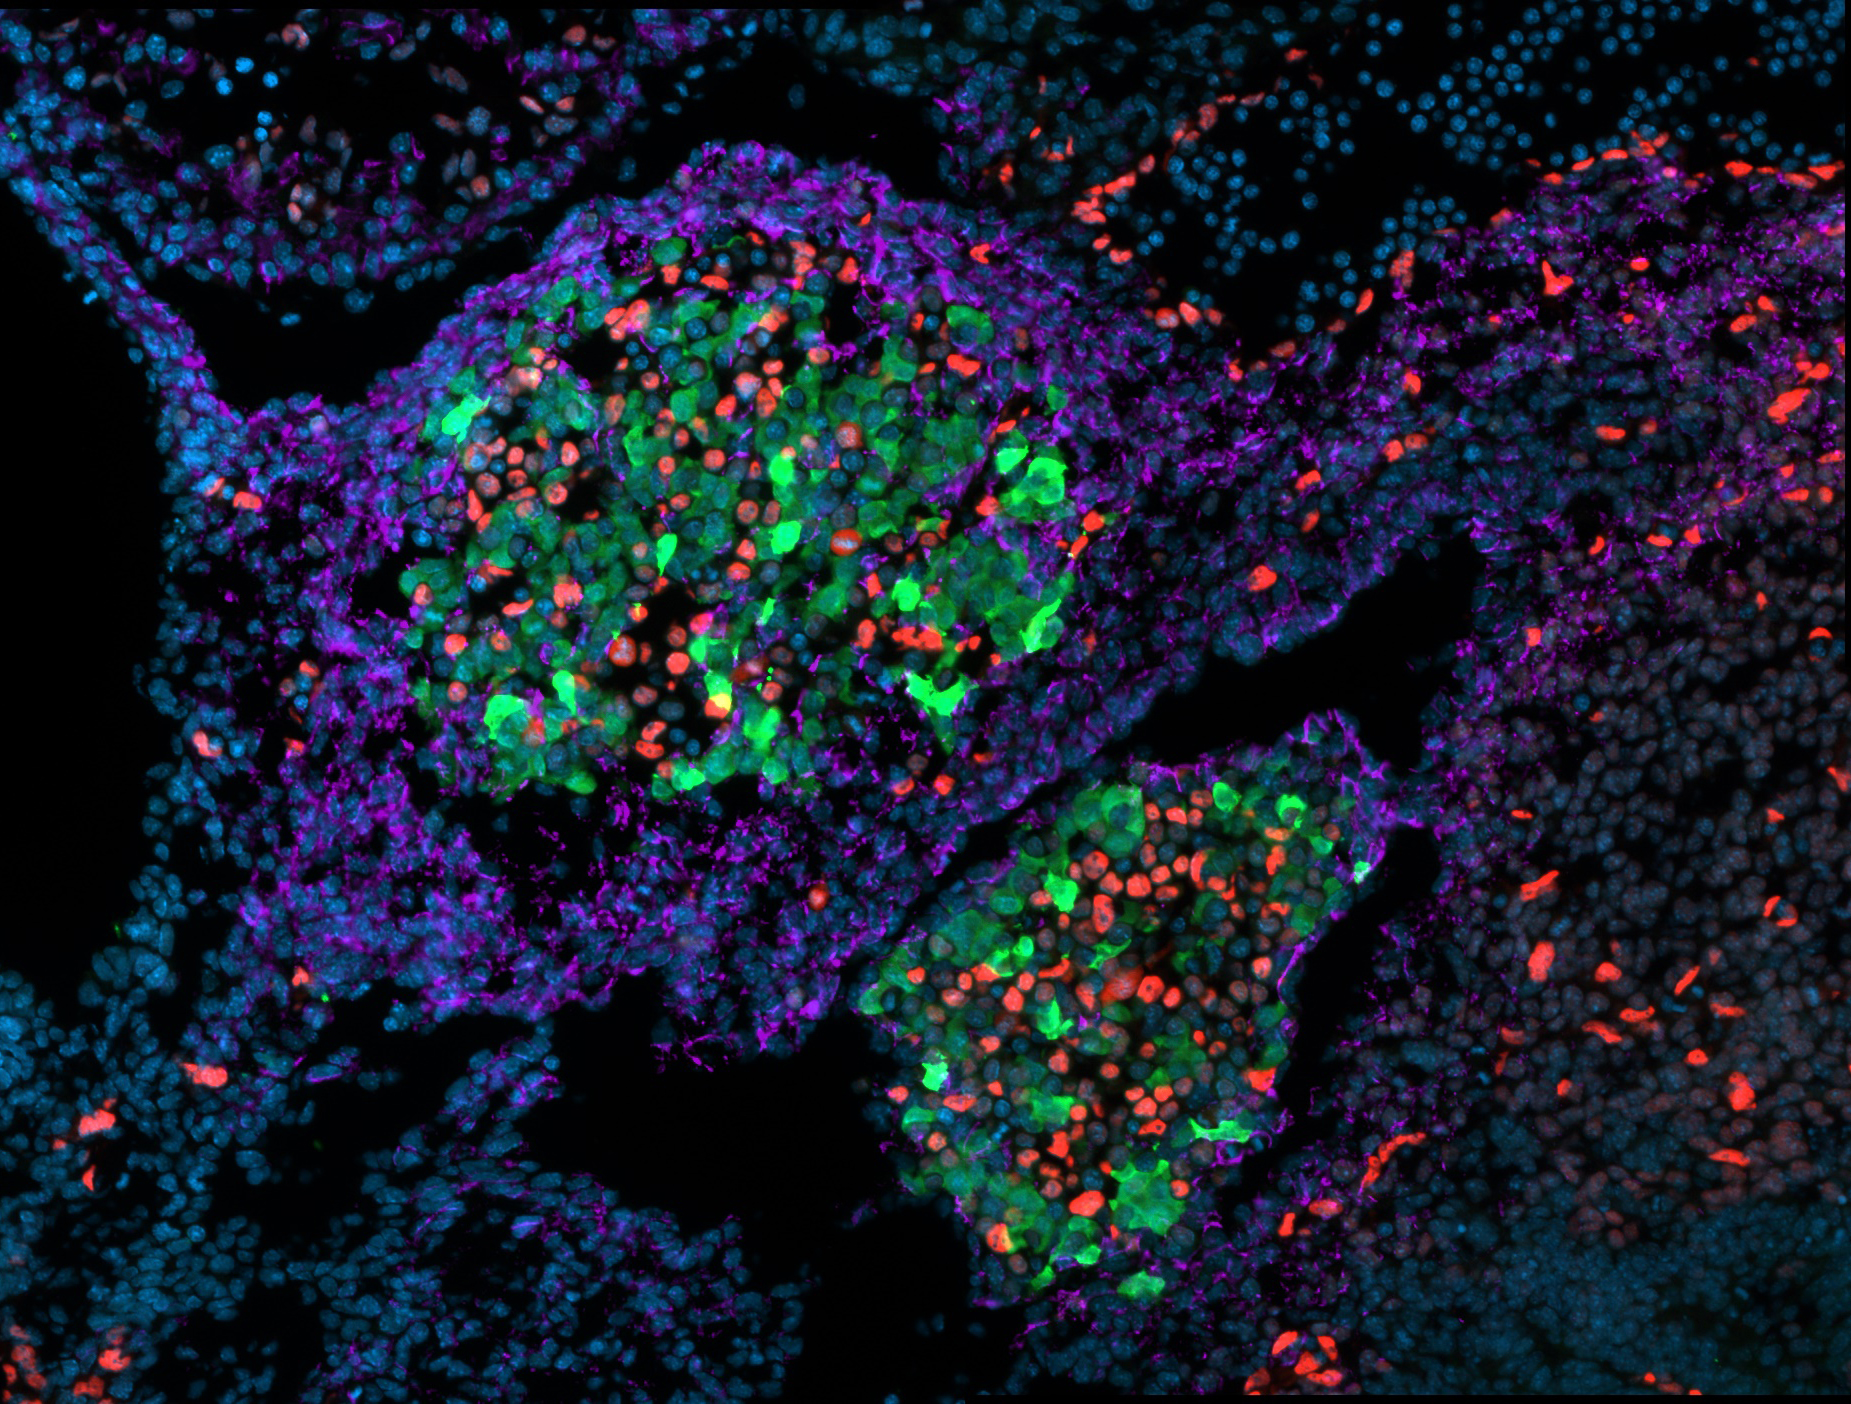 Fluorescent microscope image of the embryonic day 10.5 liver bud, showing hepatoblasts in green, mesenchyme in violet, and endothelial & hematopoietic cells in red